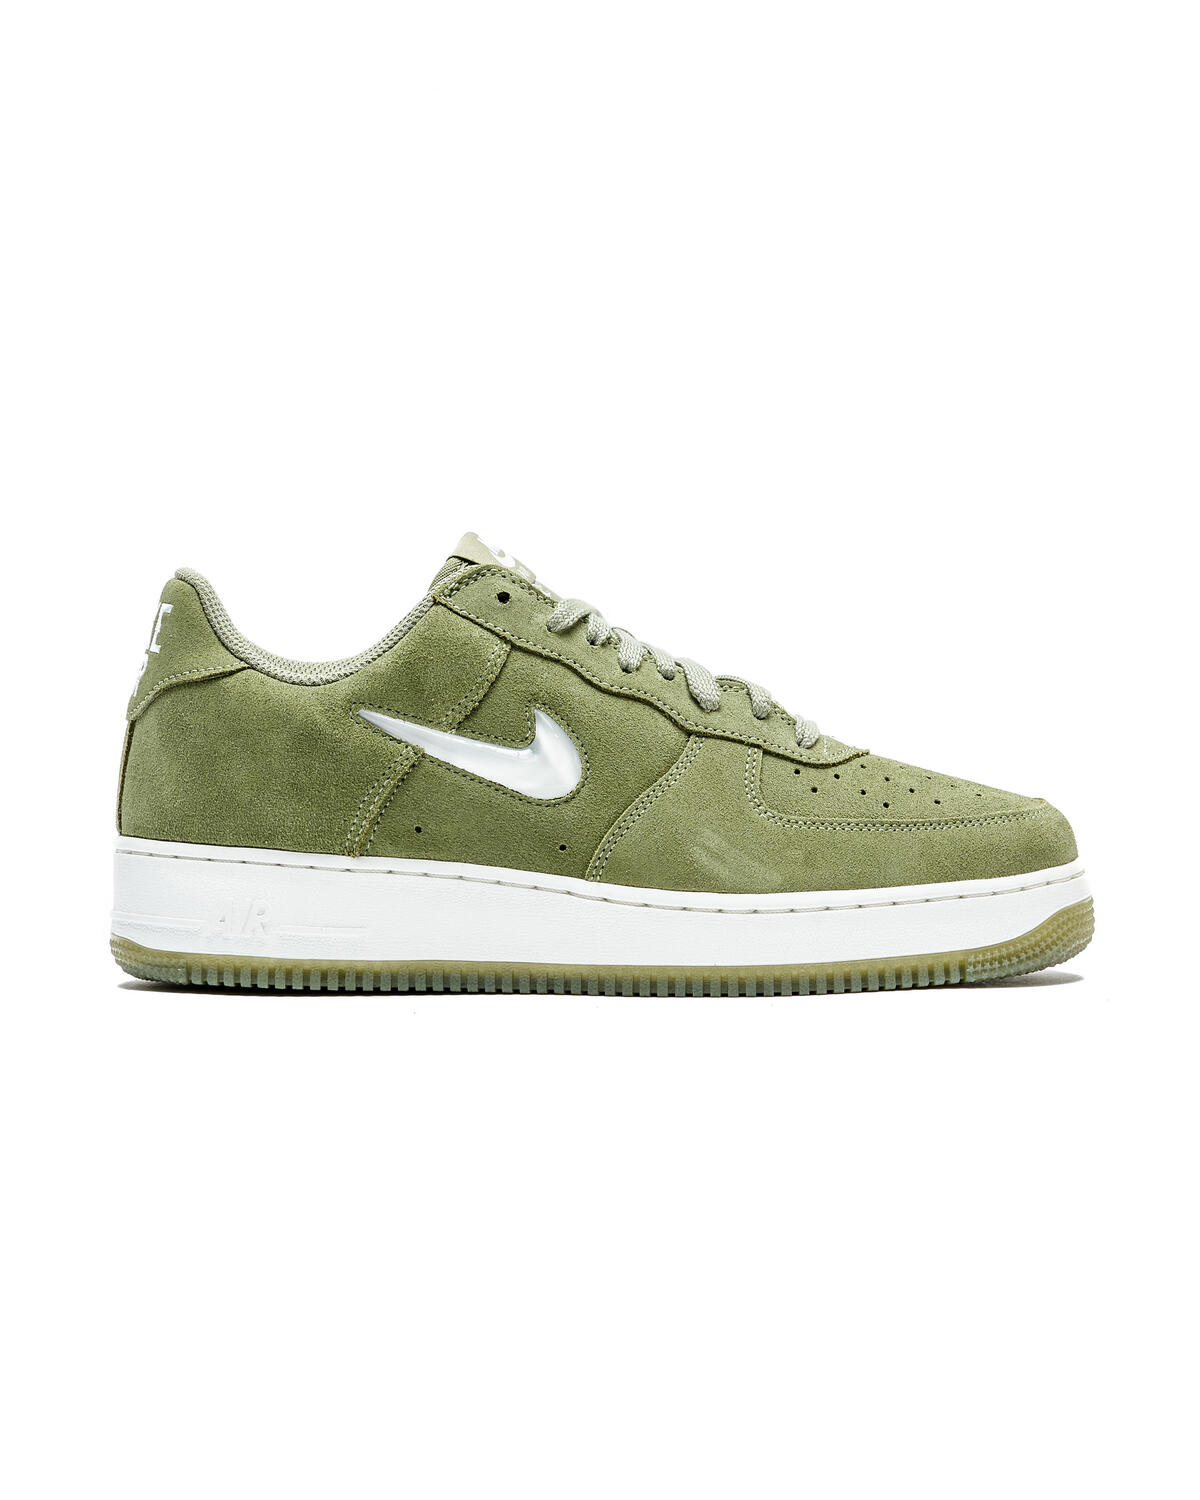 Buy the Nike Air Force 1 Low '07 LV8 Summit White Men Shoes Size 8